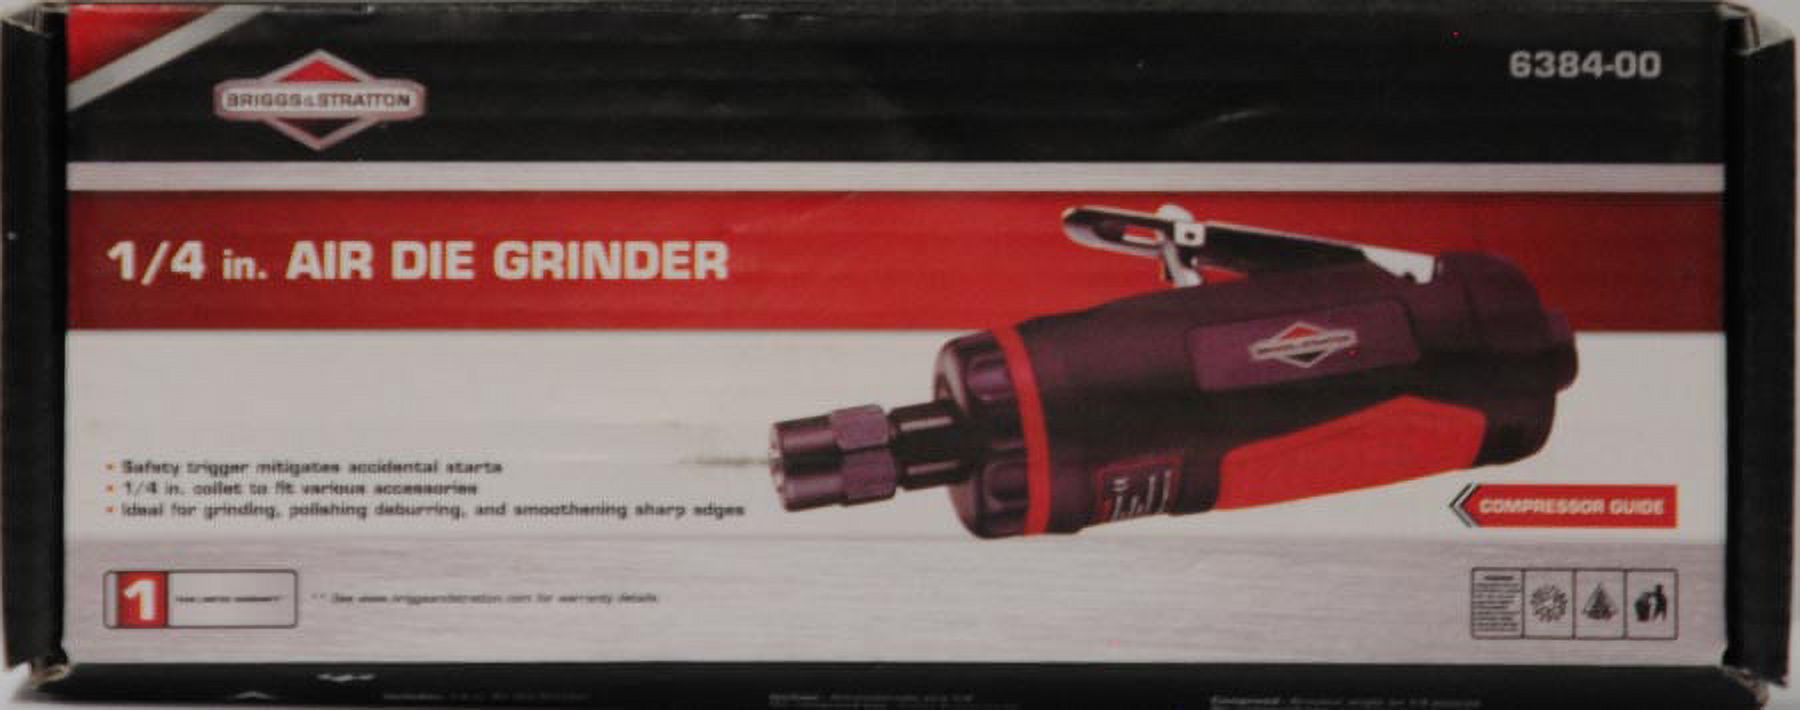 Alton Industry Briggs and Stratton Air Tools and Accessories Air Die Grinder, BSTDG001 - image 2 of 2